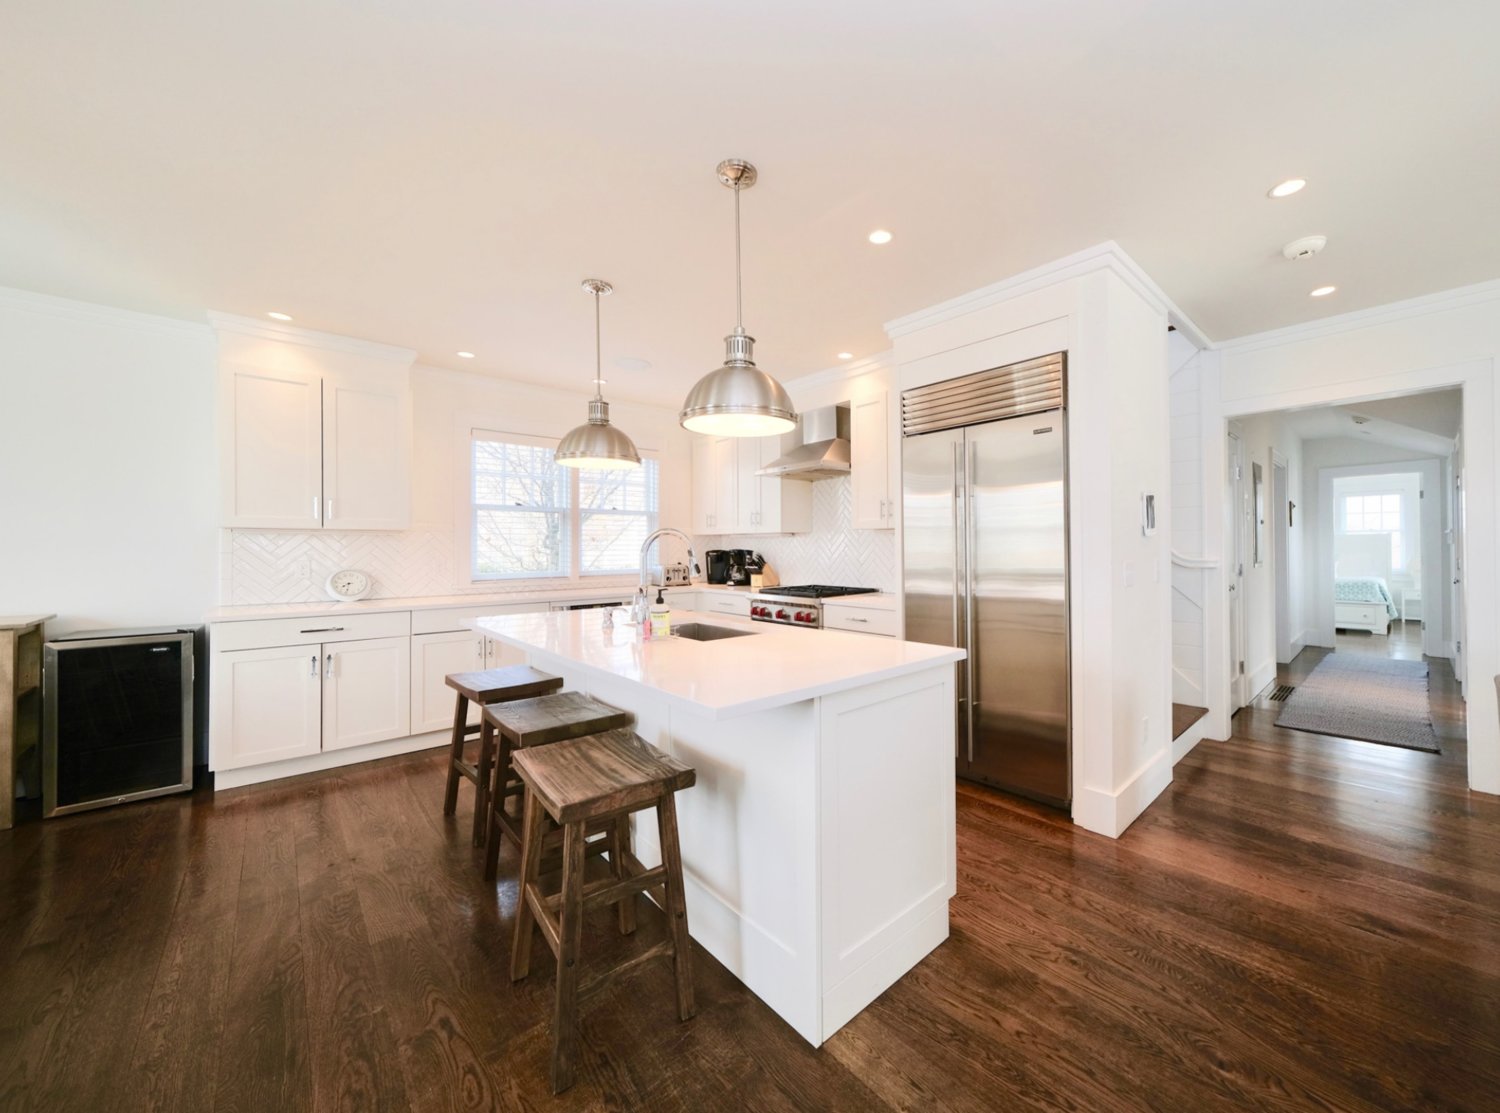 The gourmet kitchen has wood floors, a large center island with a sink and bar-style seating, and high-end appliances including a Wolf cooktop and range.